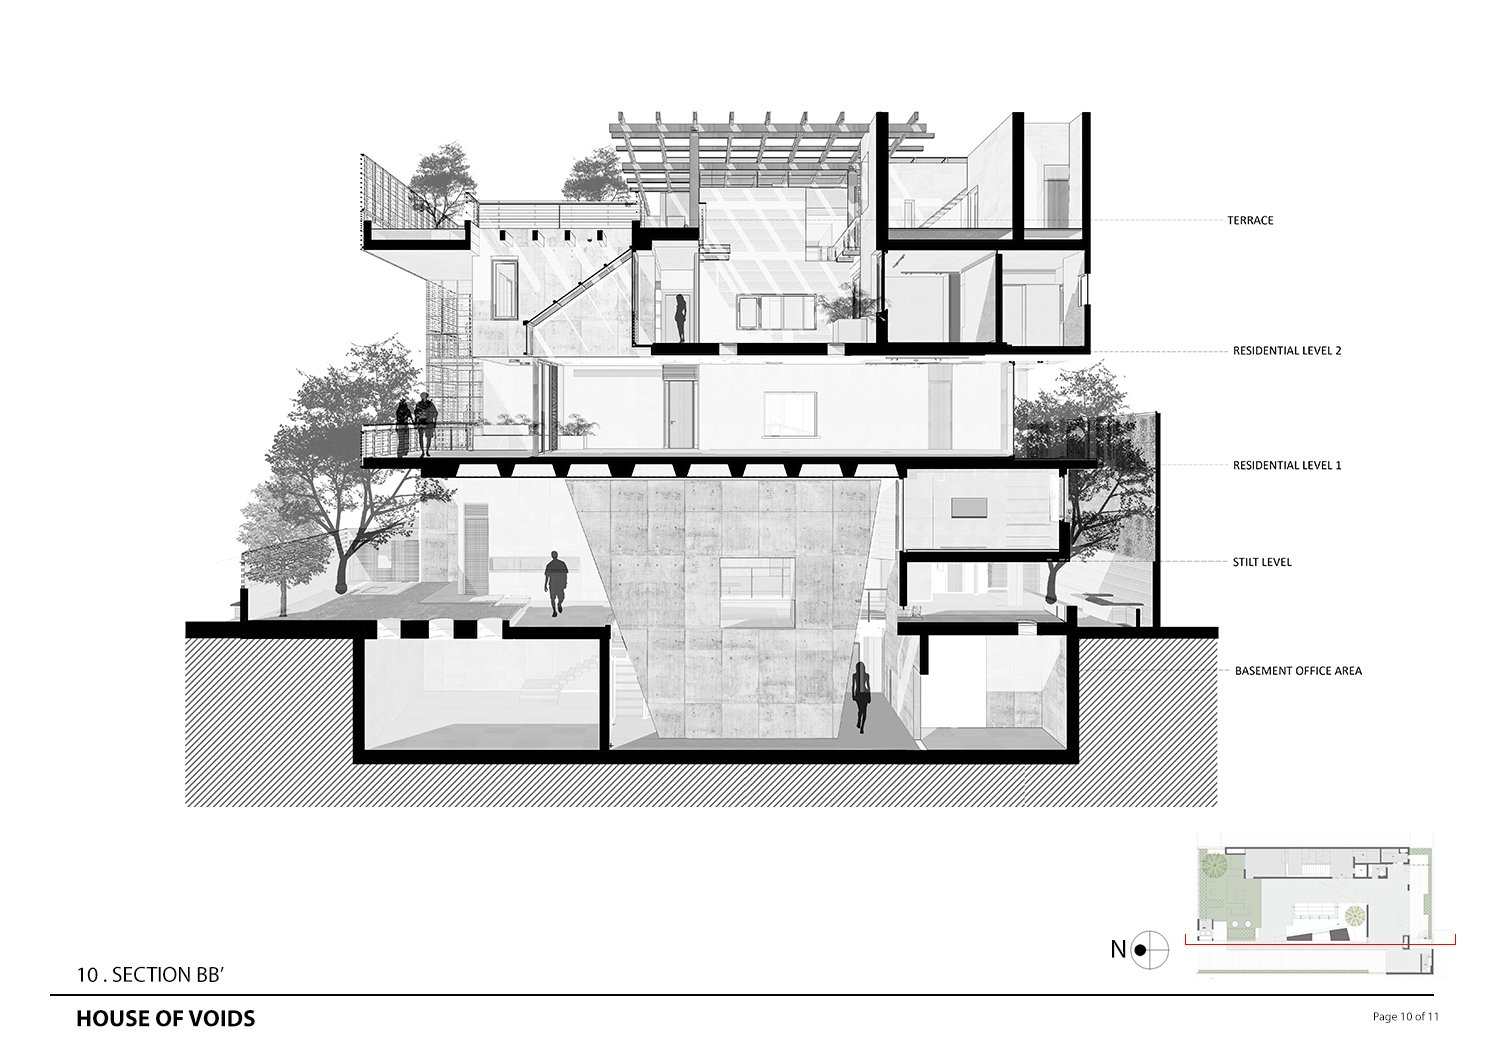 Longitudinal section showing the structural pylon and various terraces | Malik Architecture